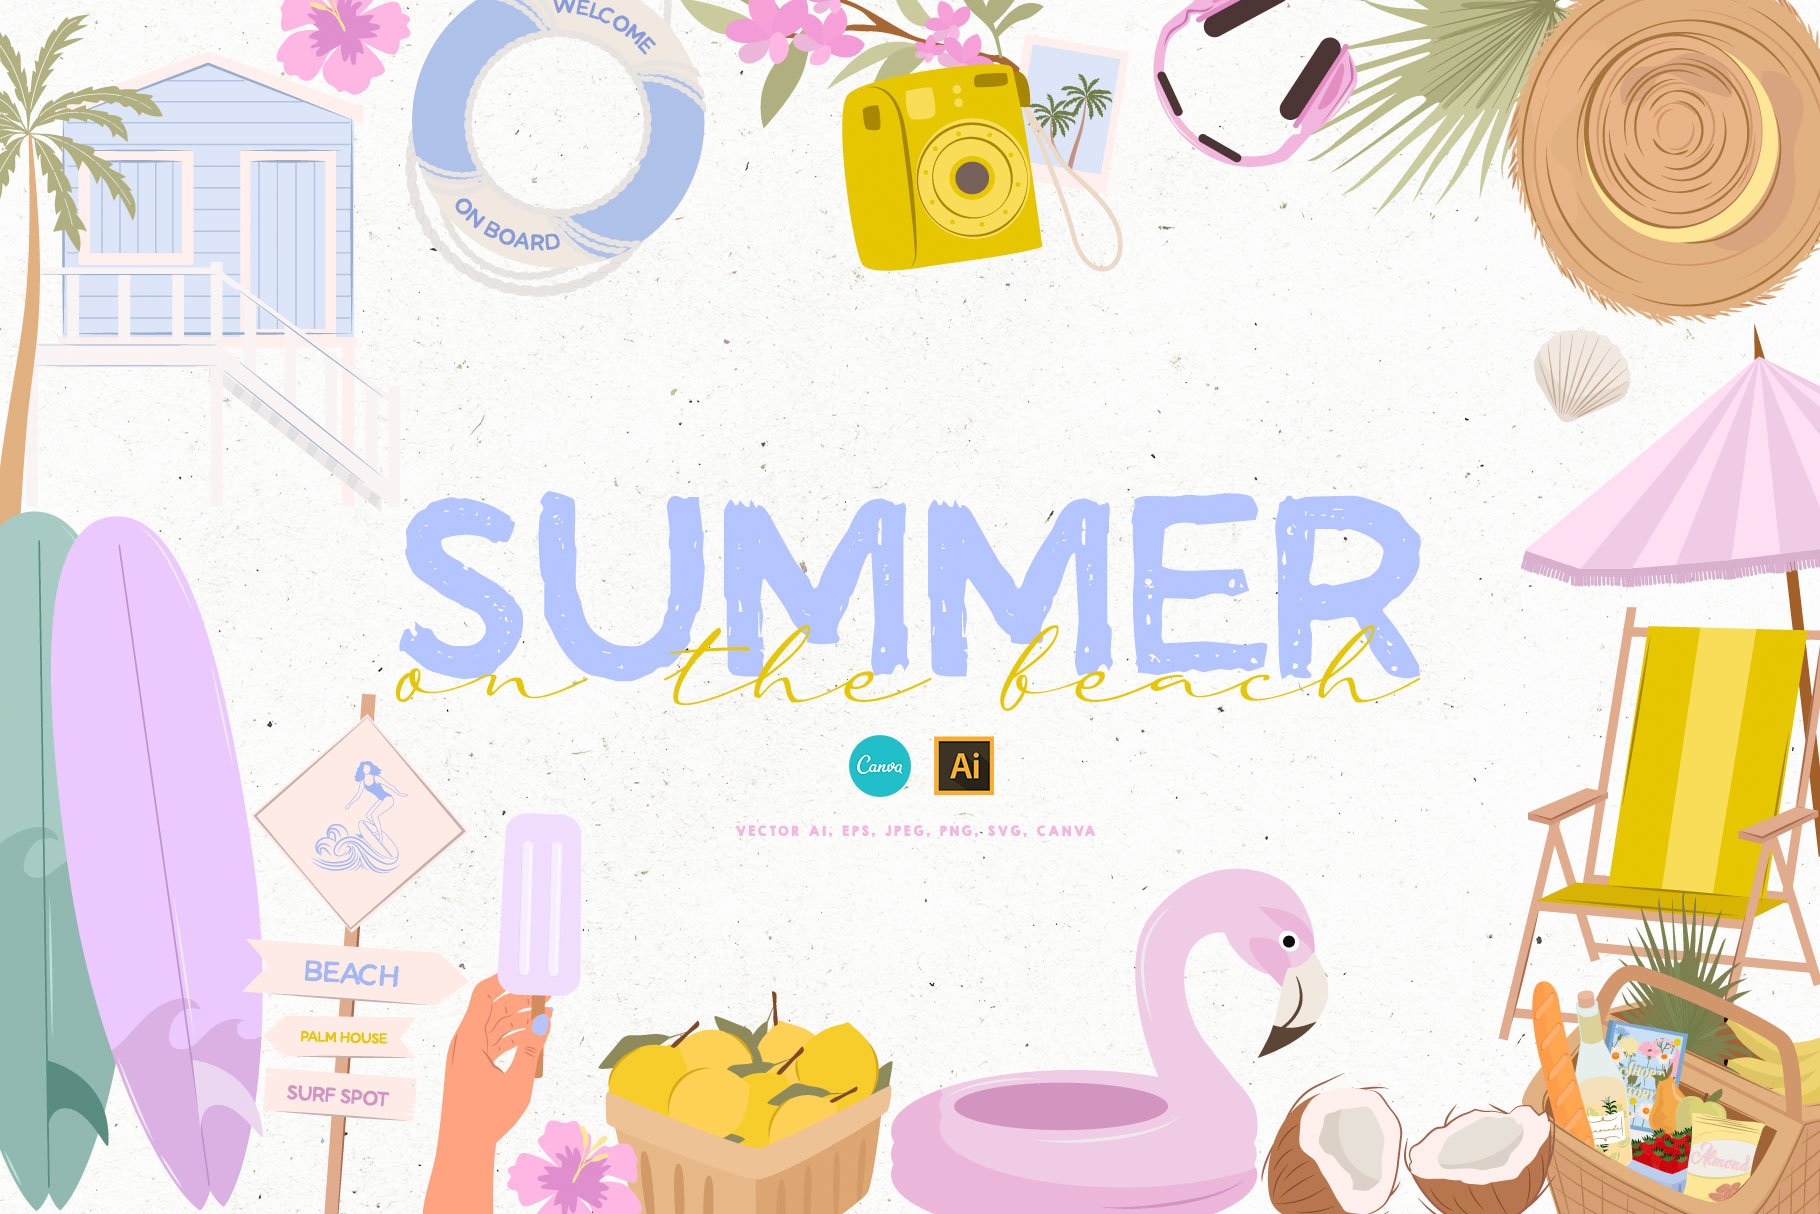 Summer on the beach cover image.